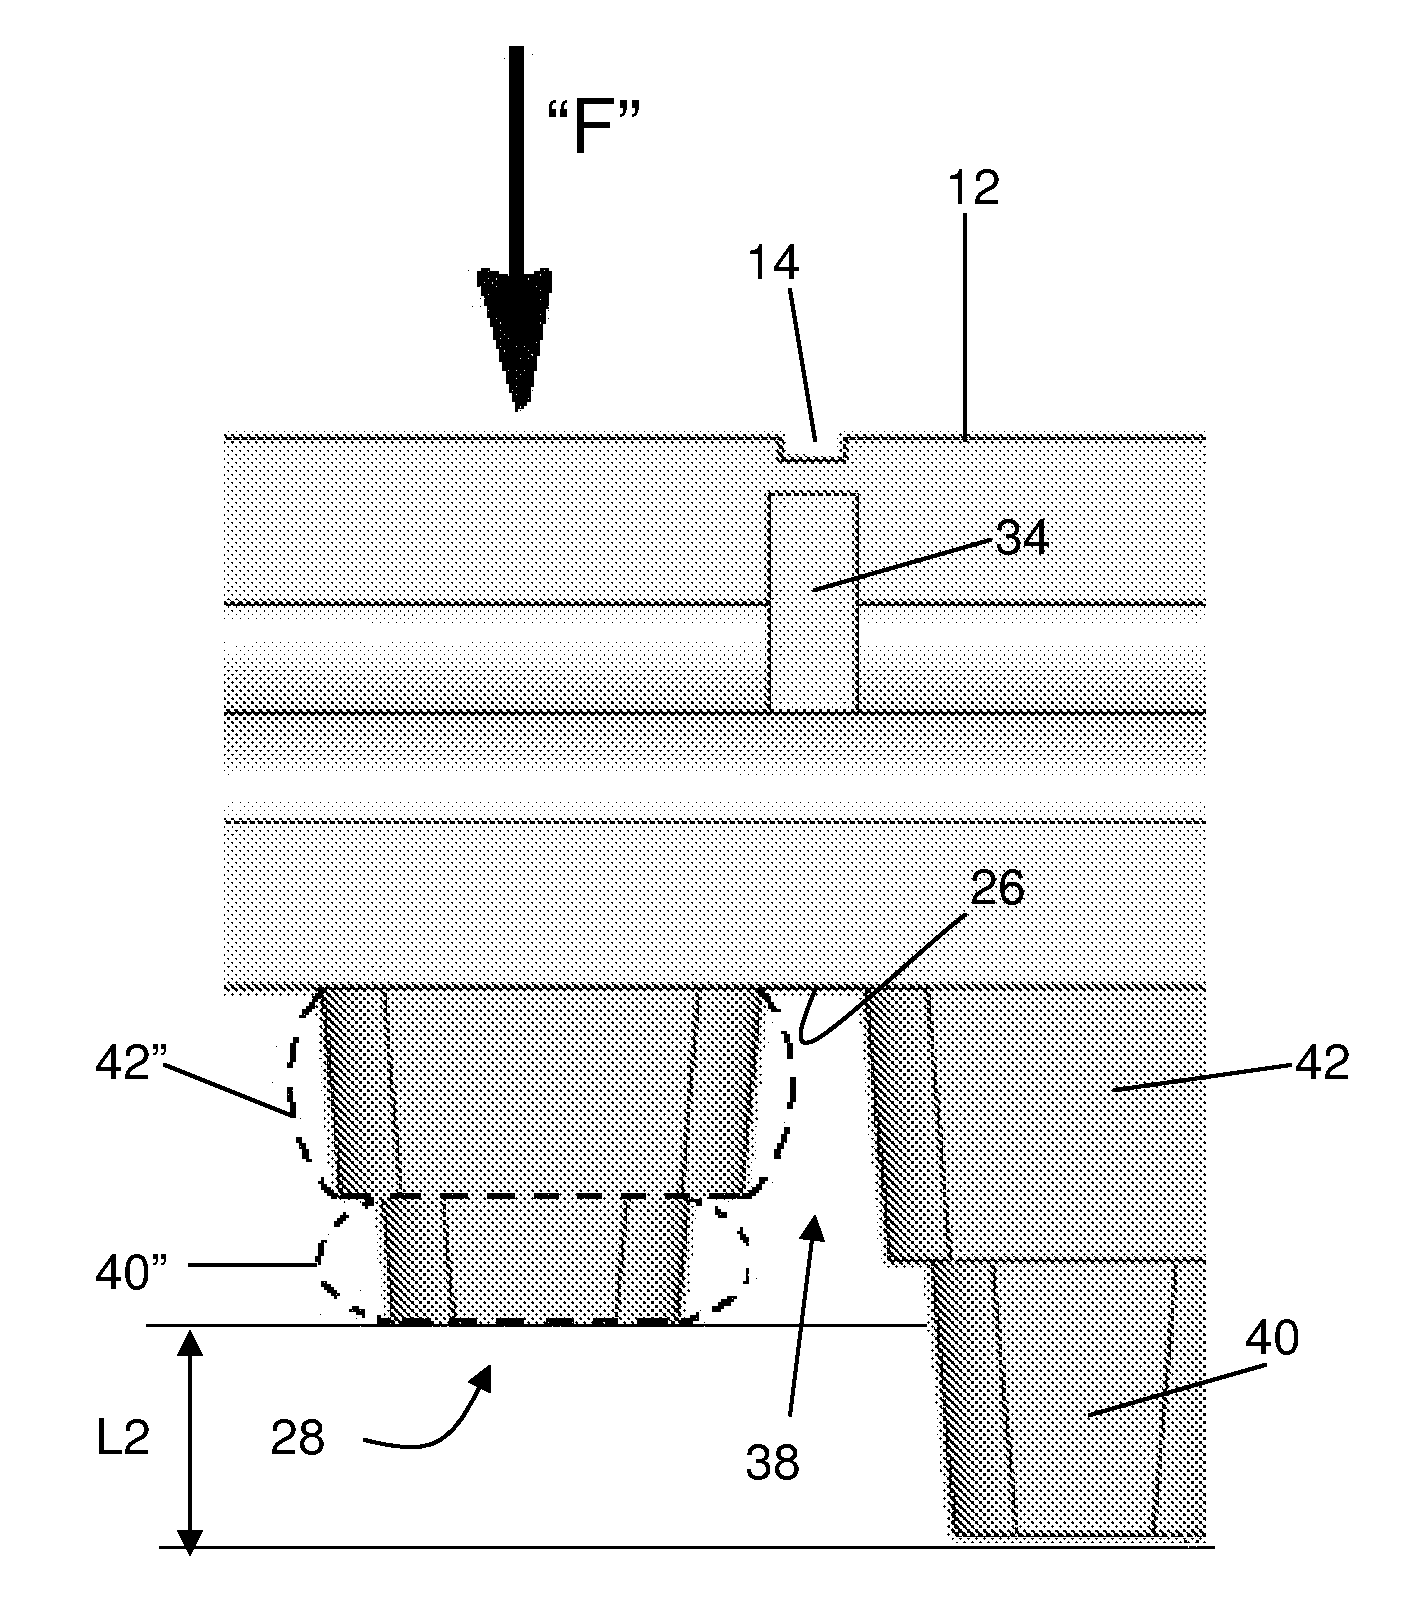 Load supporting panel having impact absorbing structure